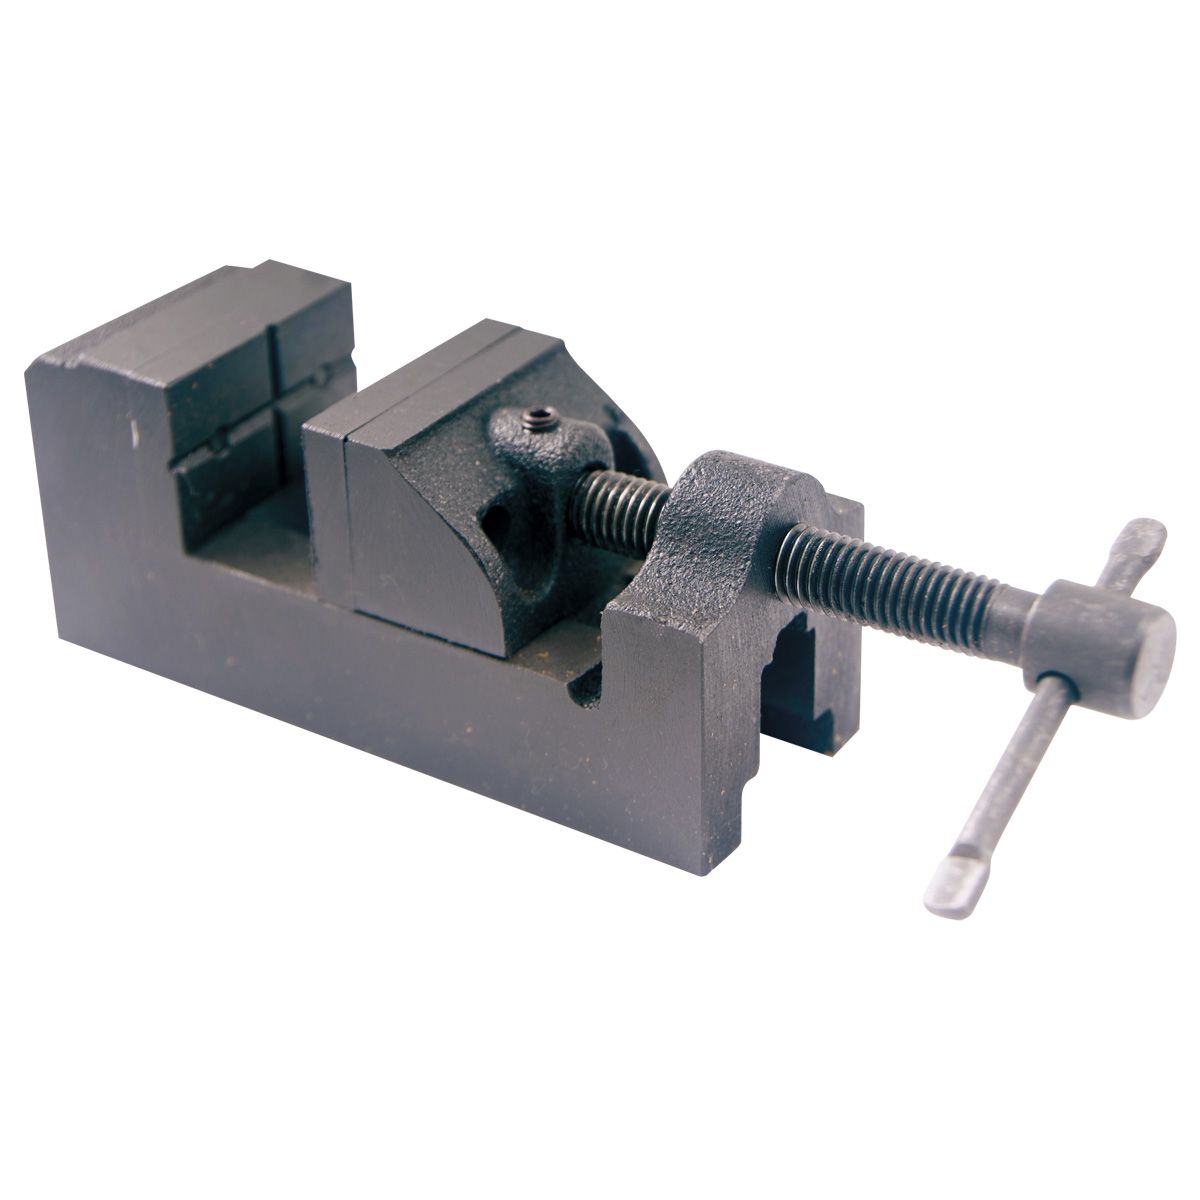 1-1/2" GROOVED JAW DRILL PRESS VISE (3900-1730)